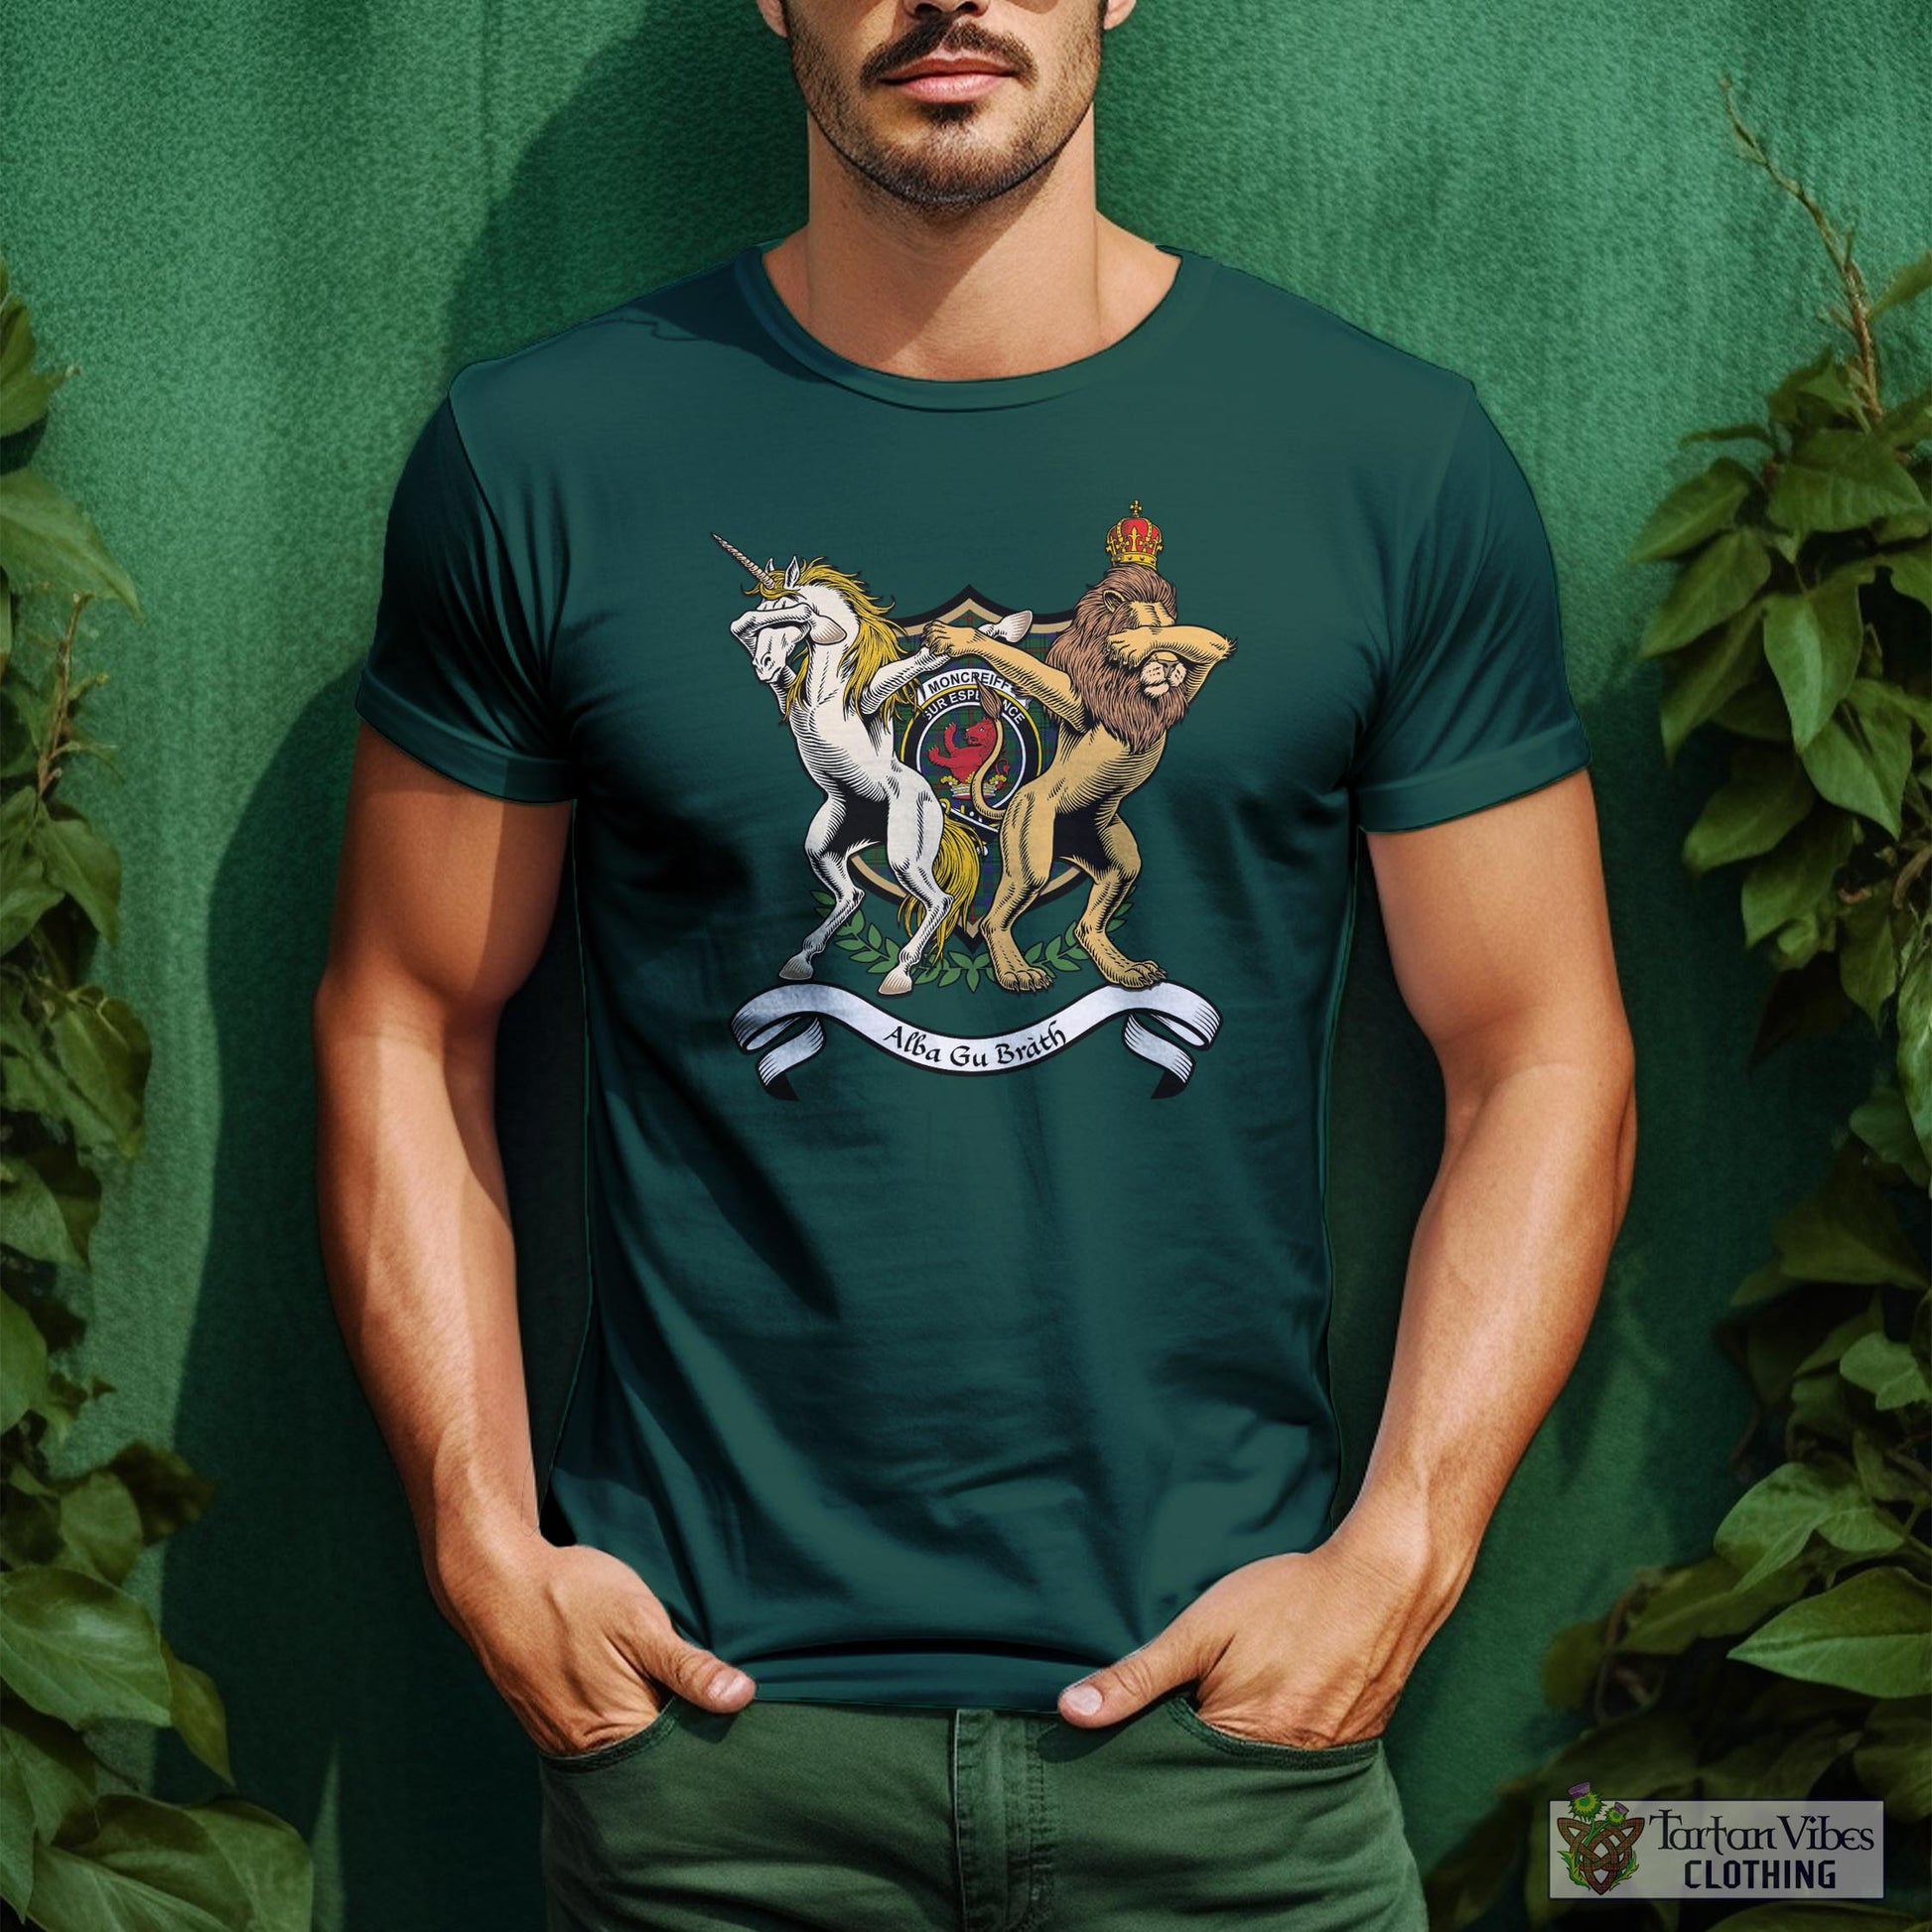 Tartan Vibes Clothing Moncrieff of Atholl Family Crest Cotton Men's T-Shirt with Scotland Royal Coat Of Arm Funny Style